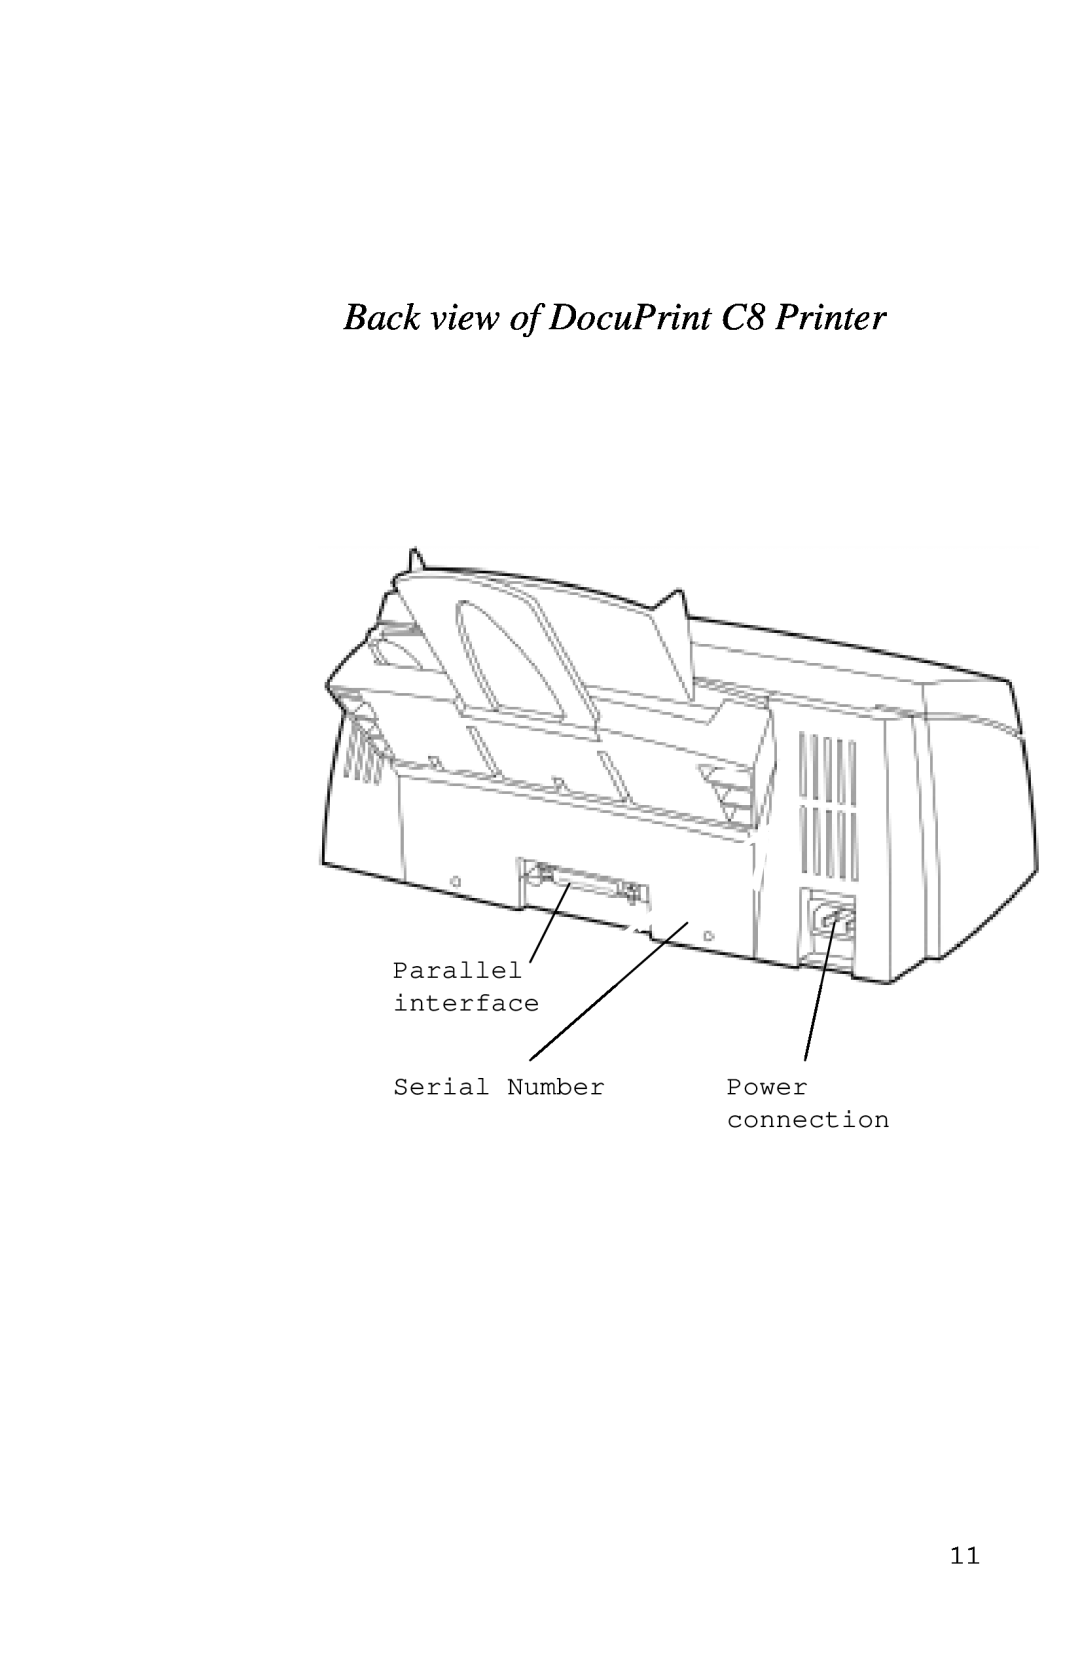 Xerox Inkjet Printer manual Back view of DocuPrint C8 Printer, Parallel interface, Serial Number, Power, connection 